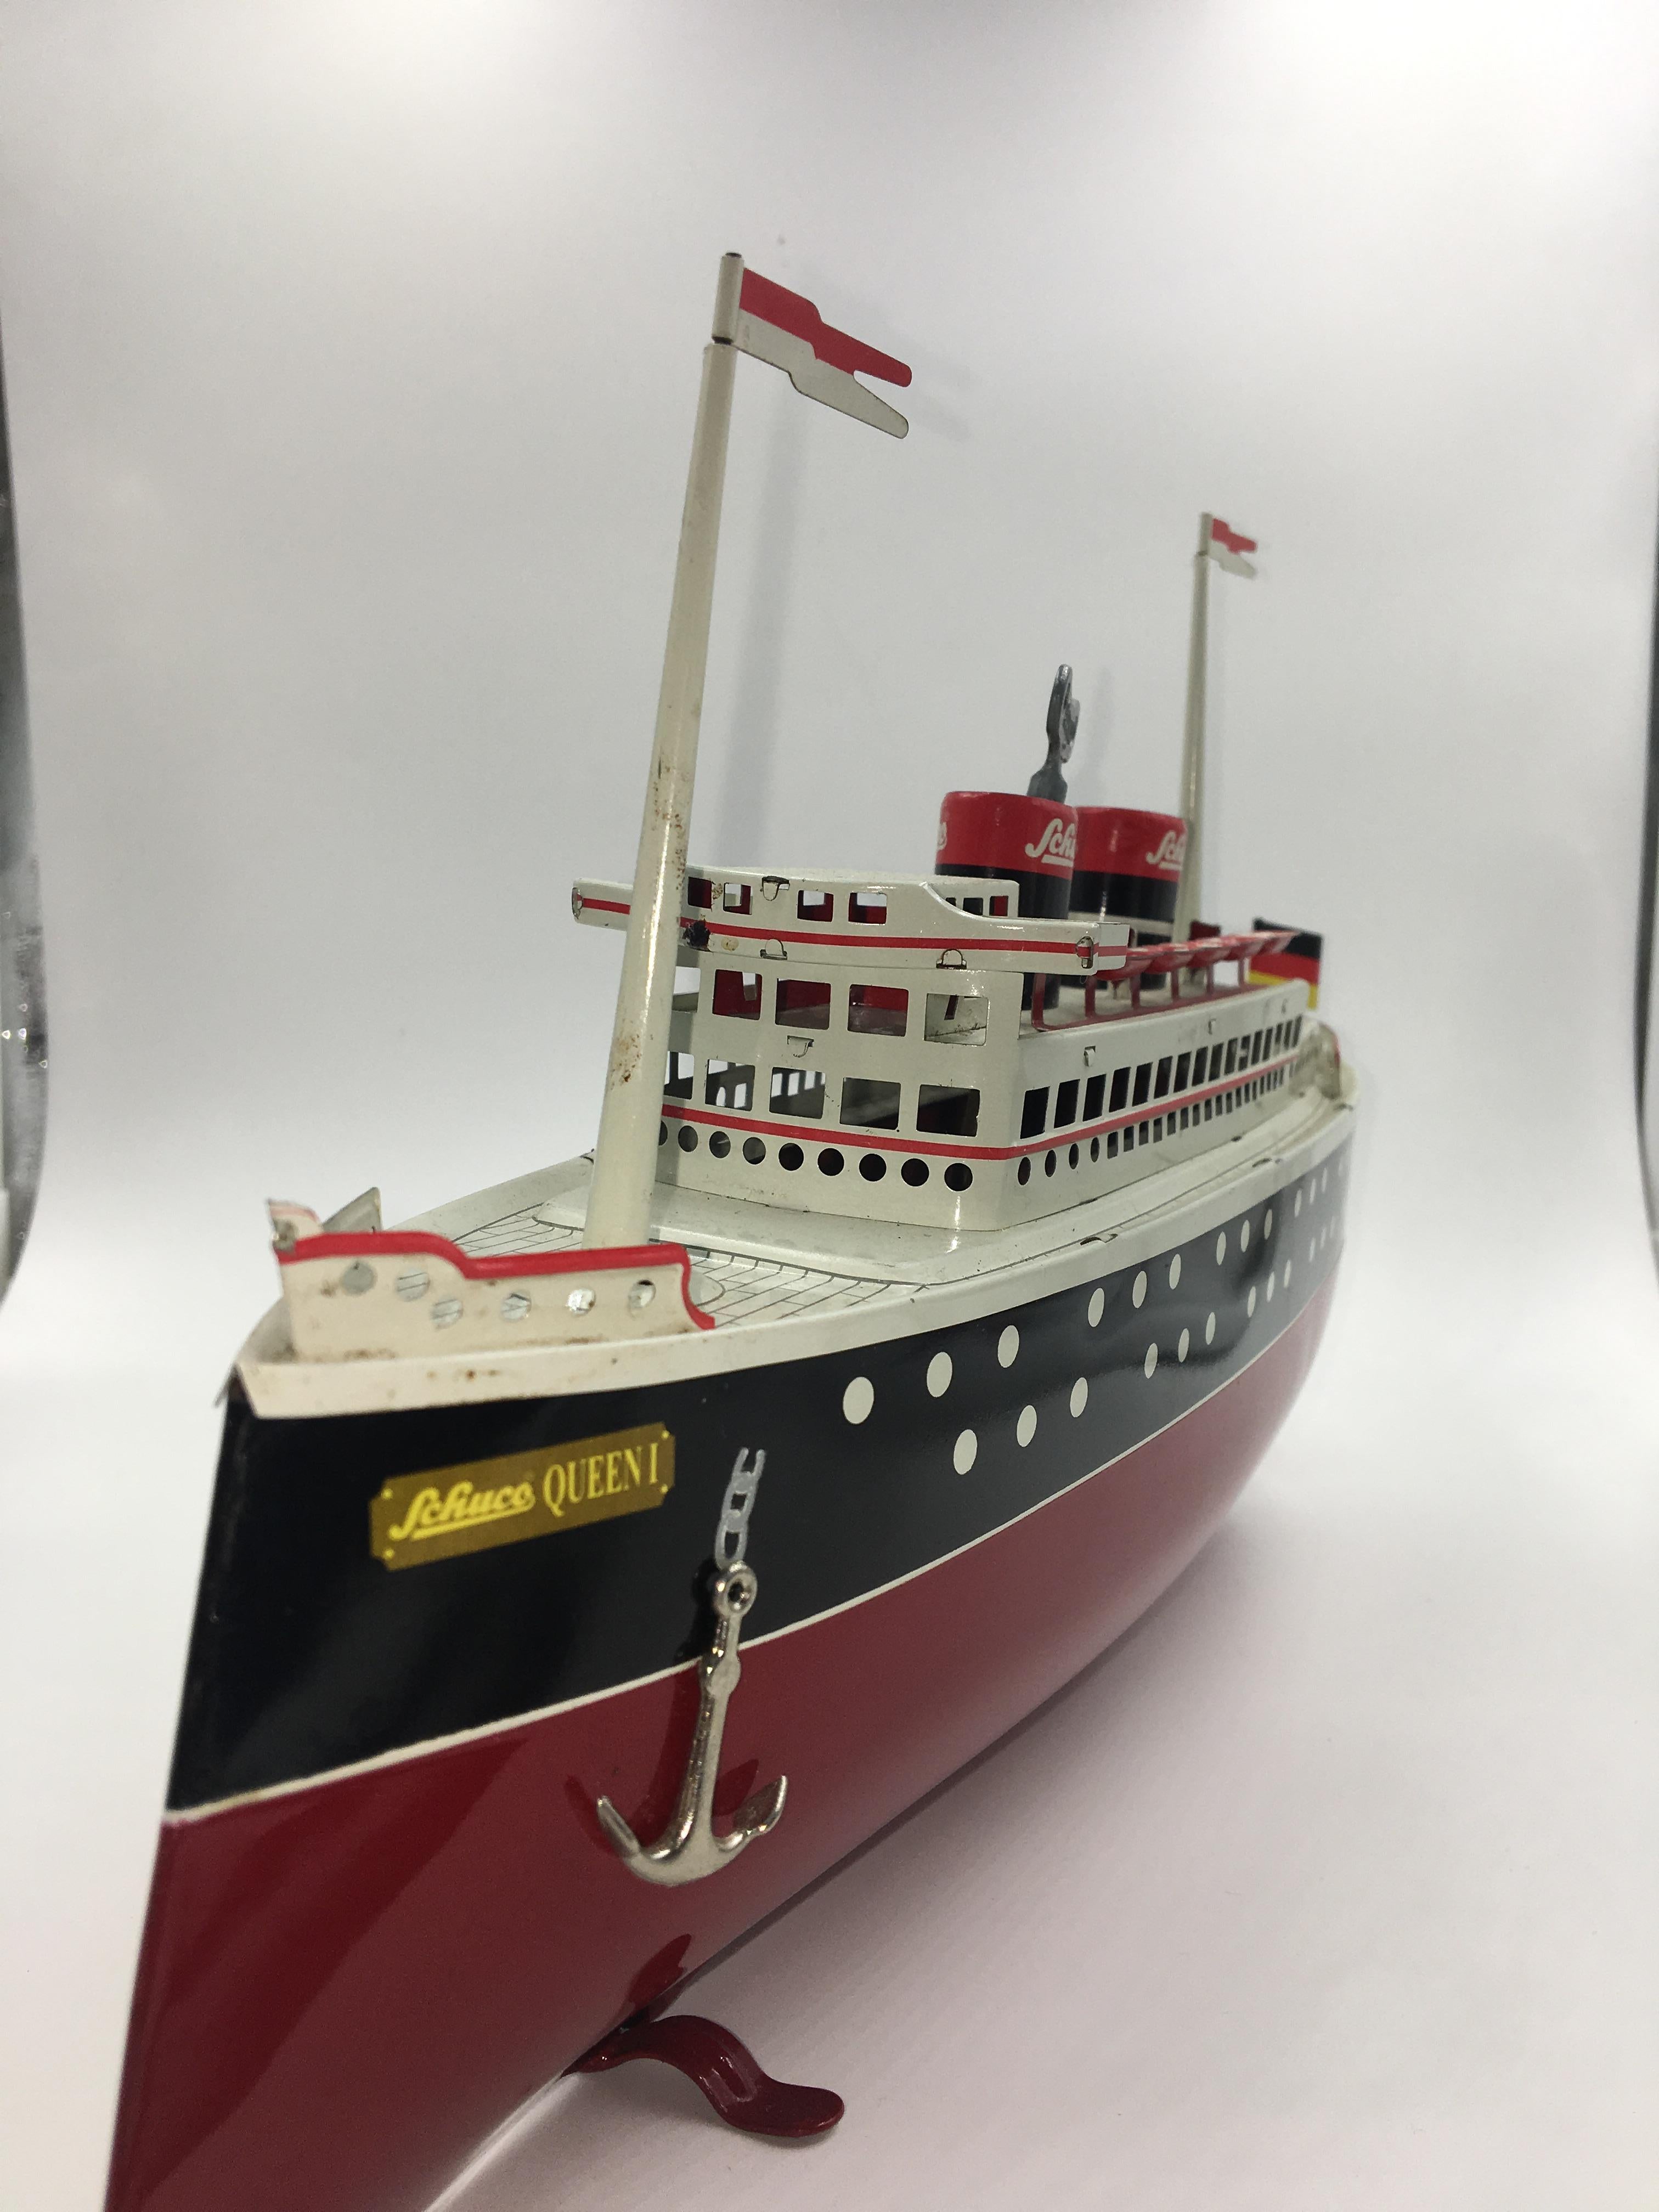 Tin toys for collectors in very good condition with the poles, flags and key.
Schuco Queen I, steam ship represents a typical passenger steam ship of the 1930s and has been handcrafted. The 28 cm long ship swims and has a long-running strong spring